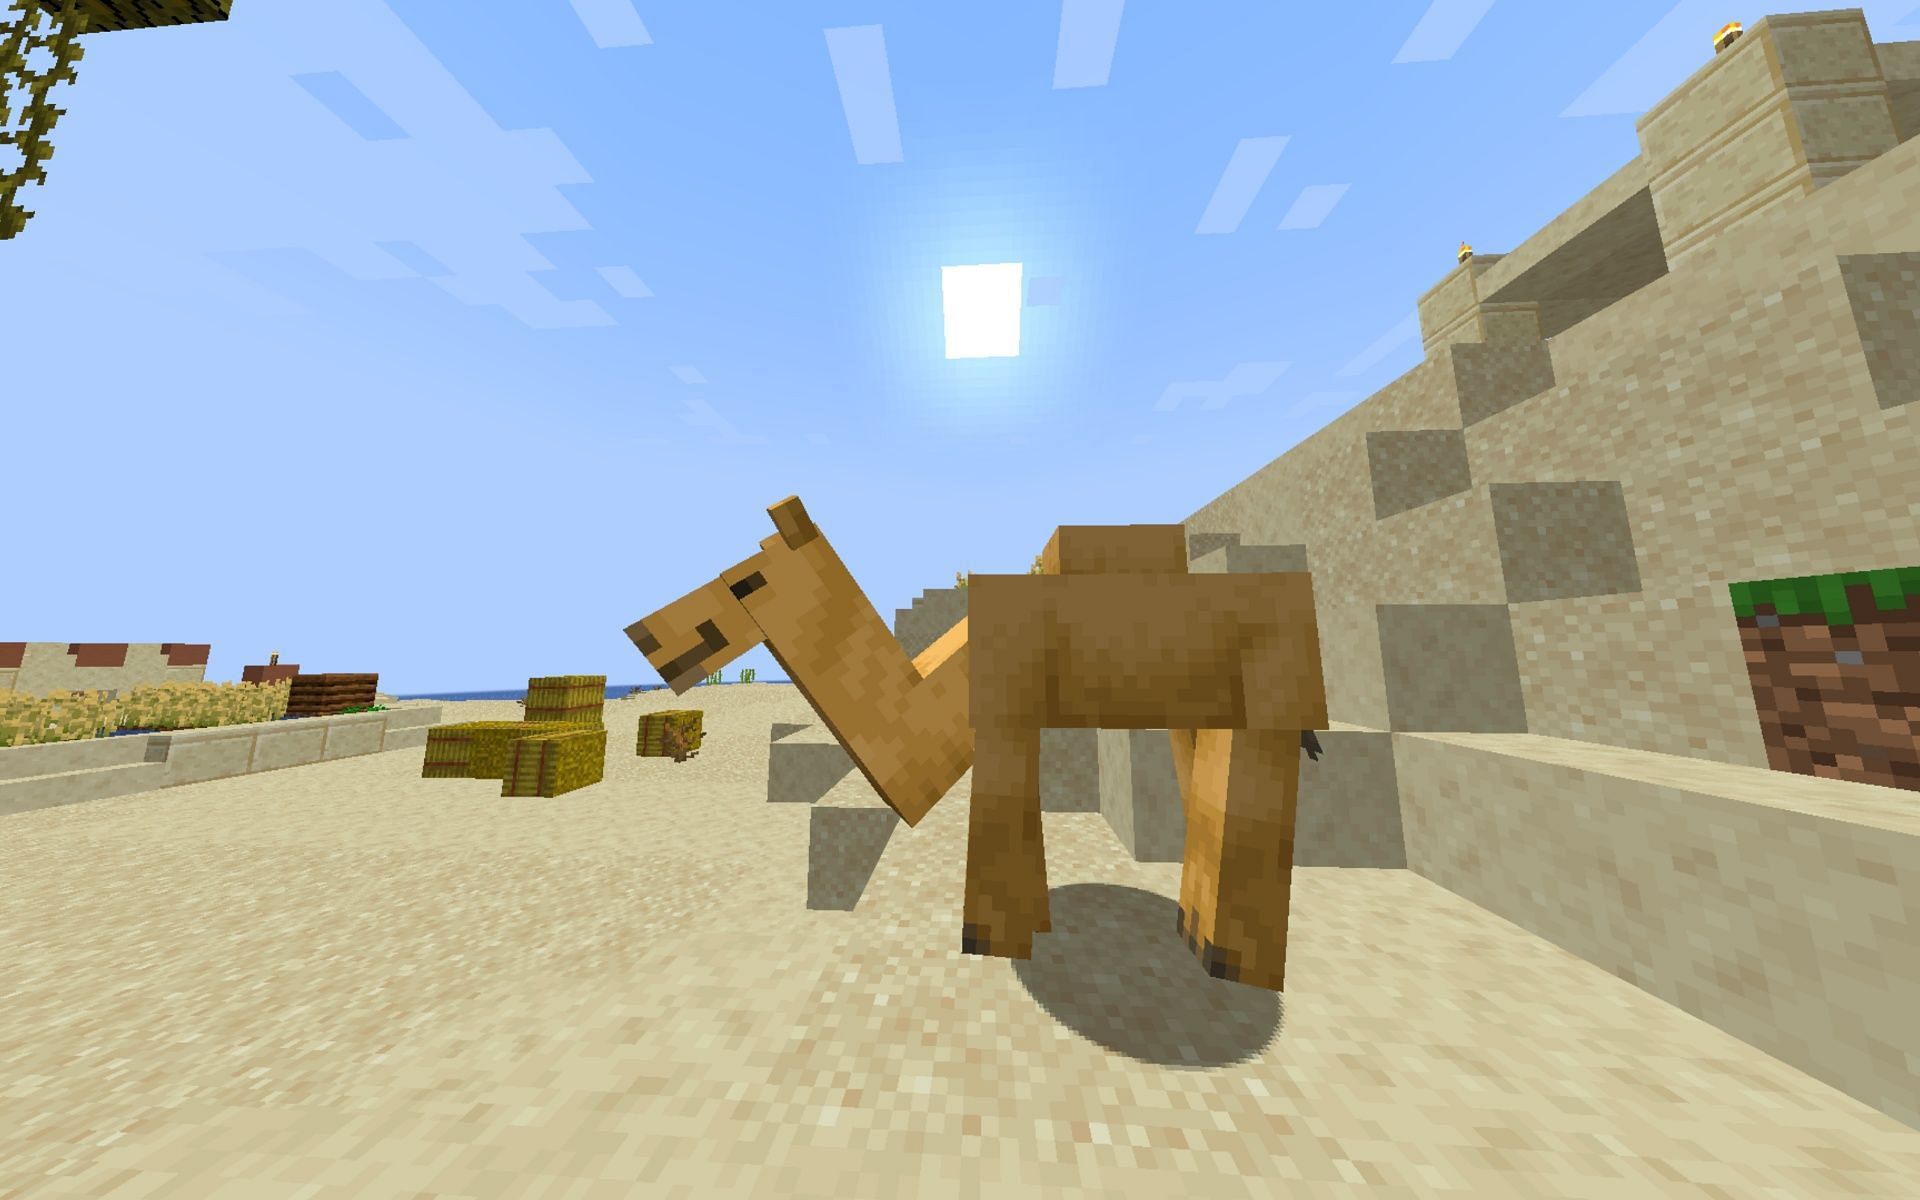 Camels are the latest addition to the desert biome in Minecraft (Image via Mojang)